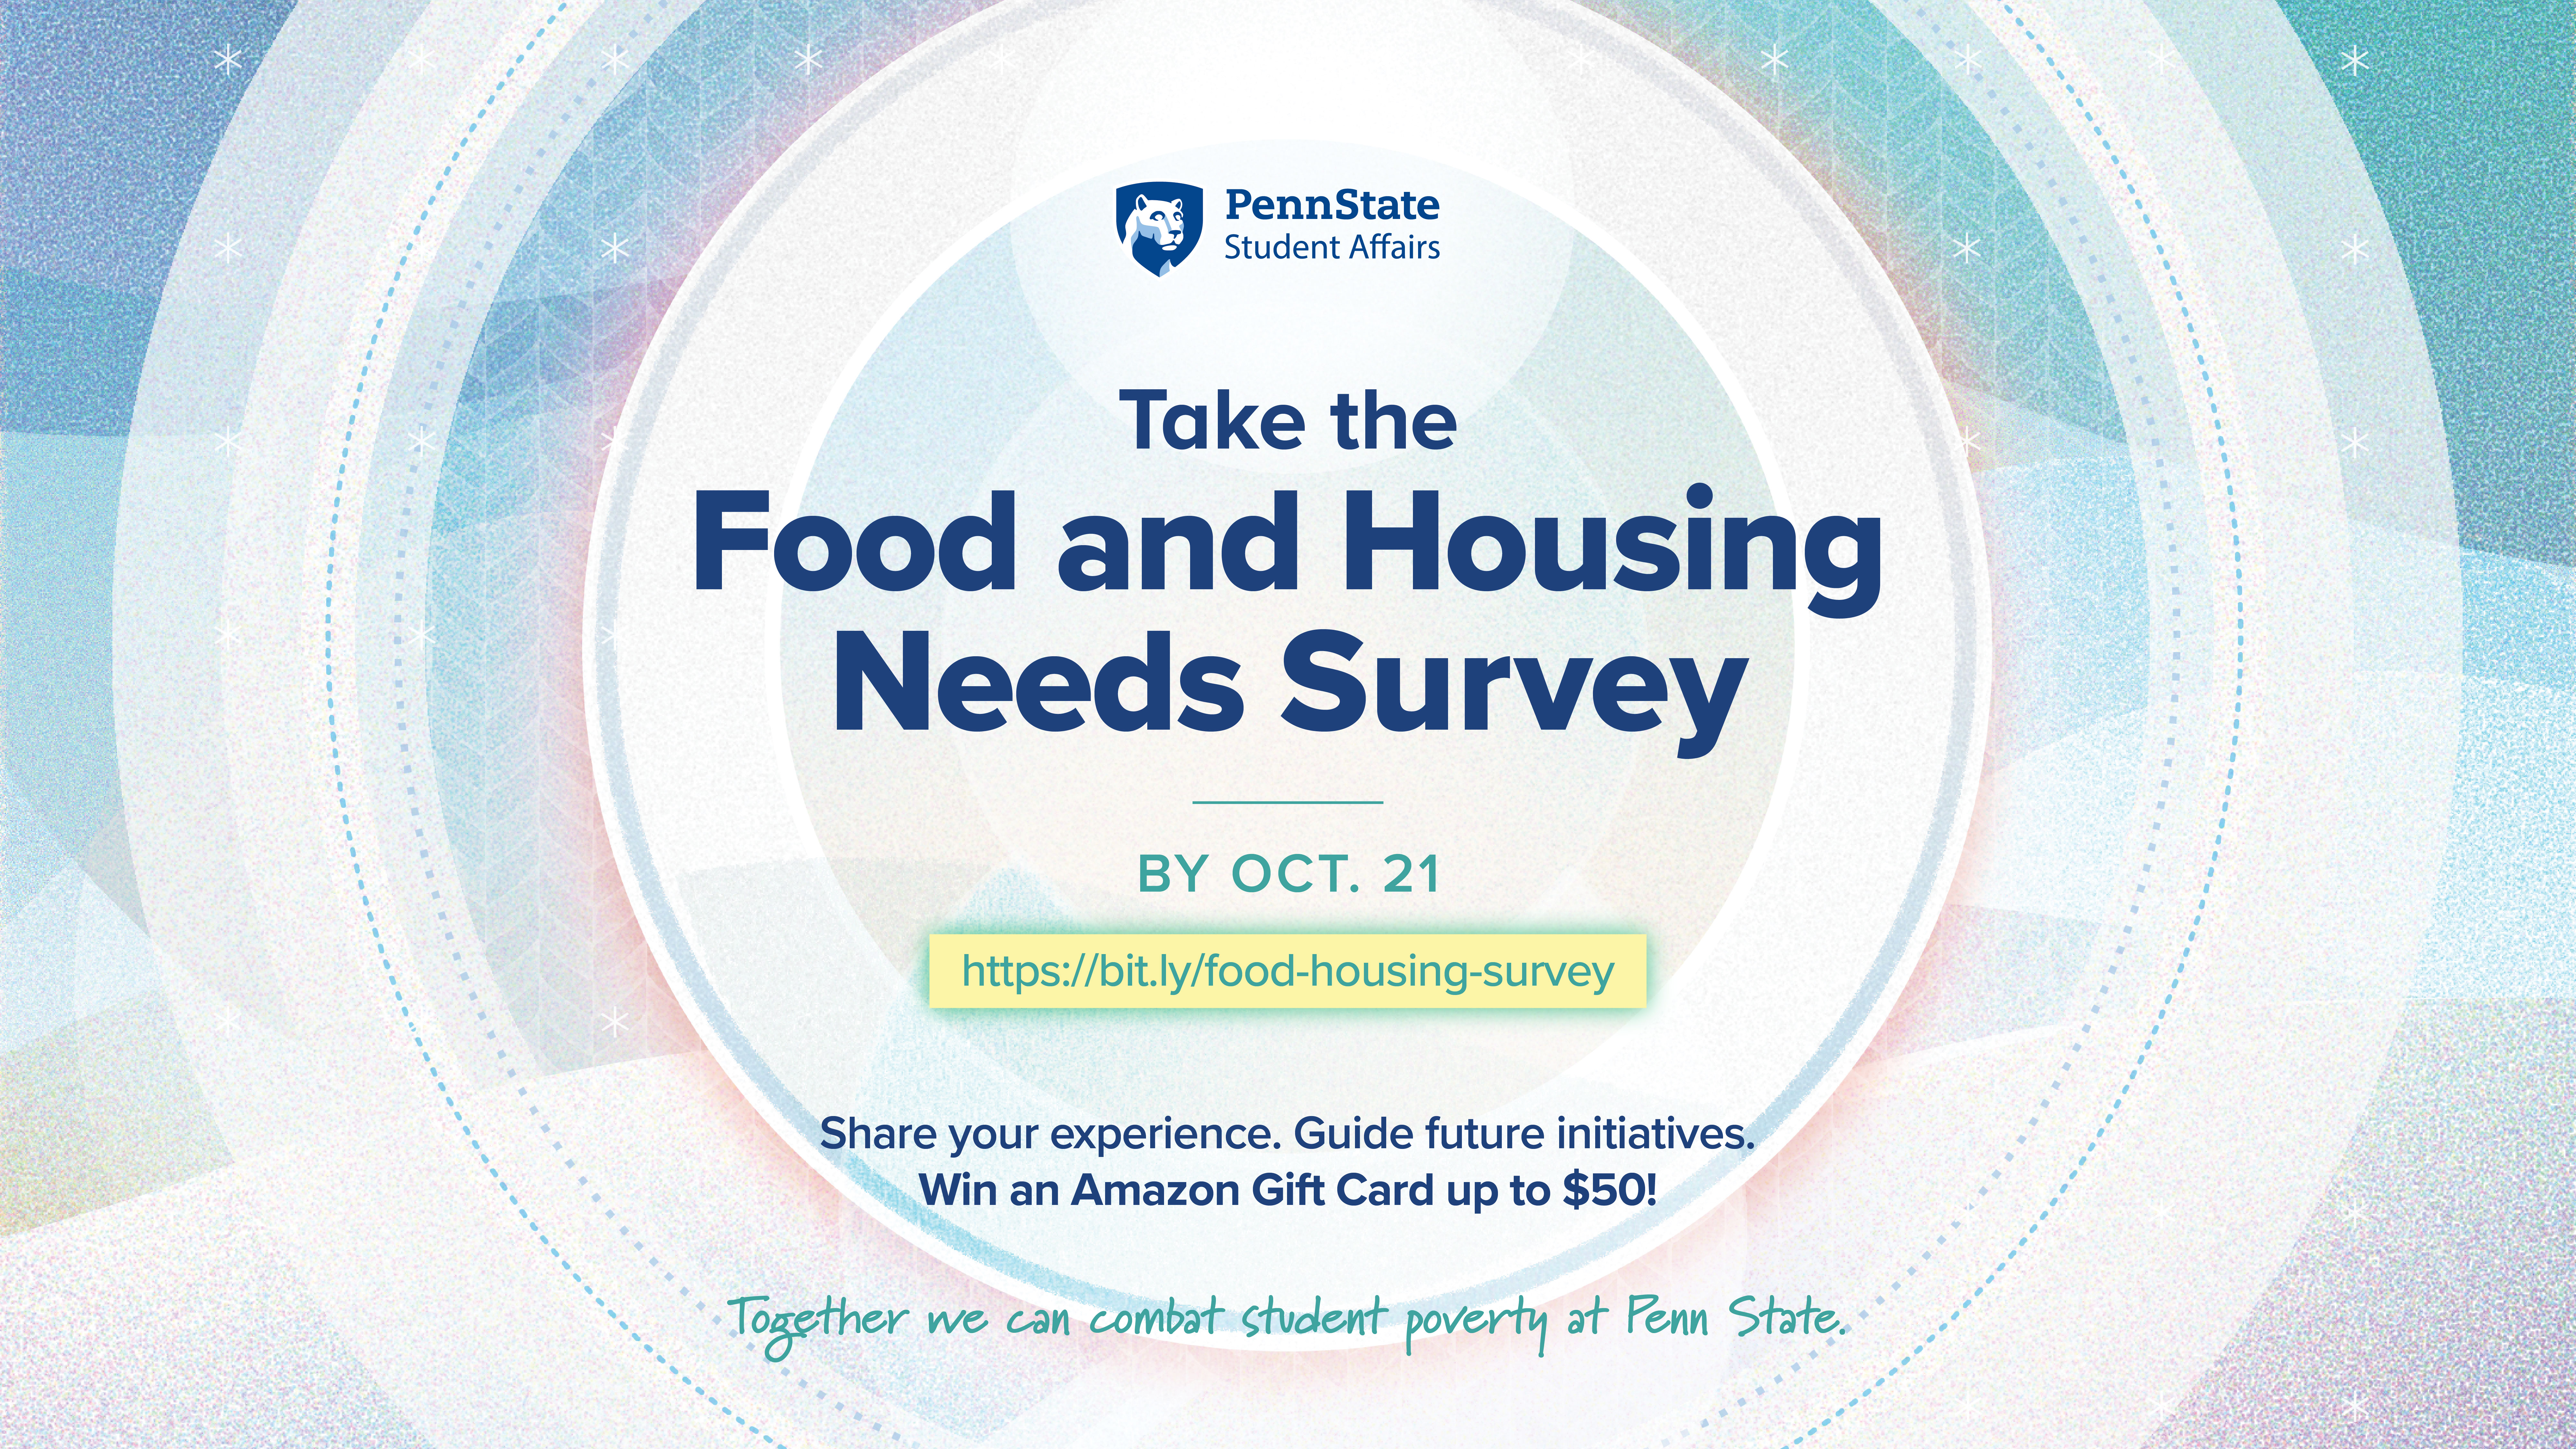 Fill out the Food and Housing Needs Survey by October 21 and win an Amazon Gift Card up to $50